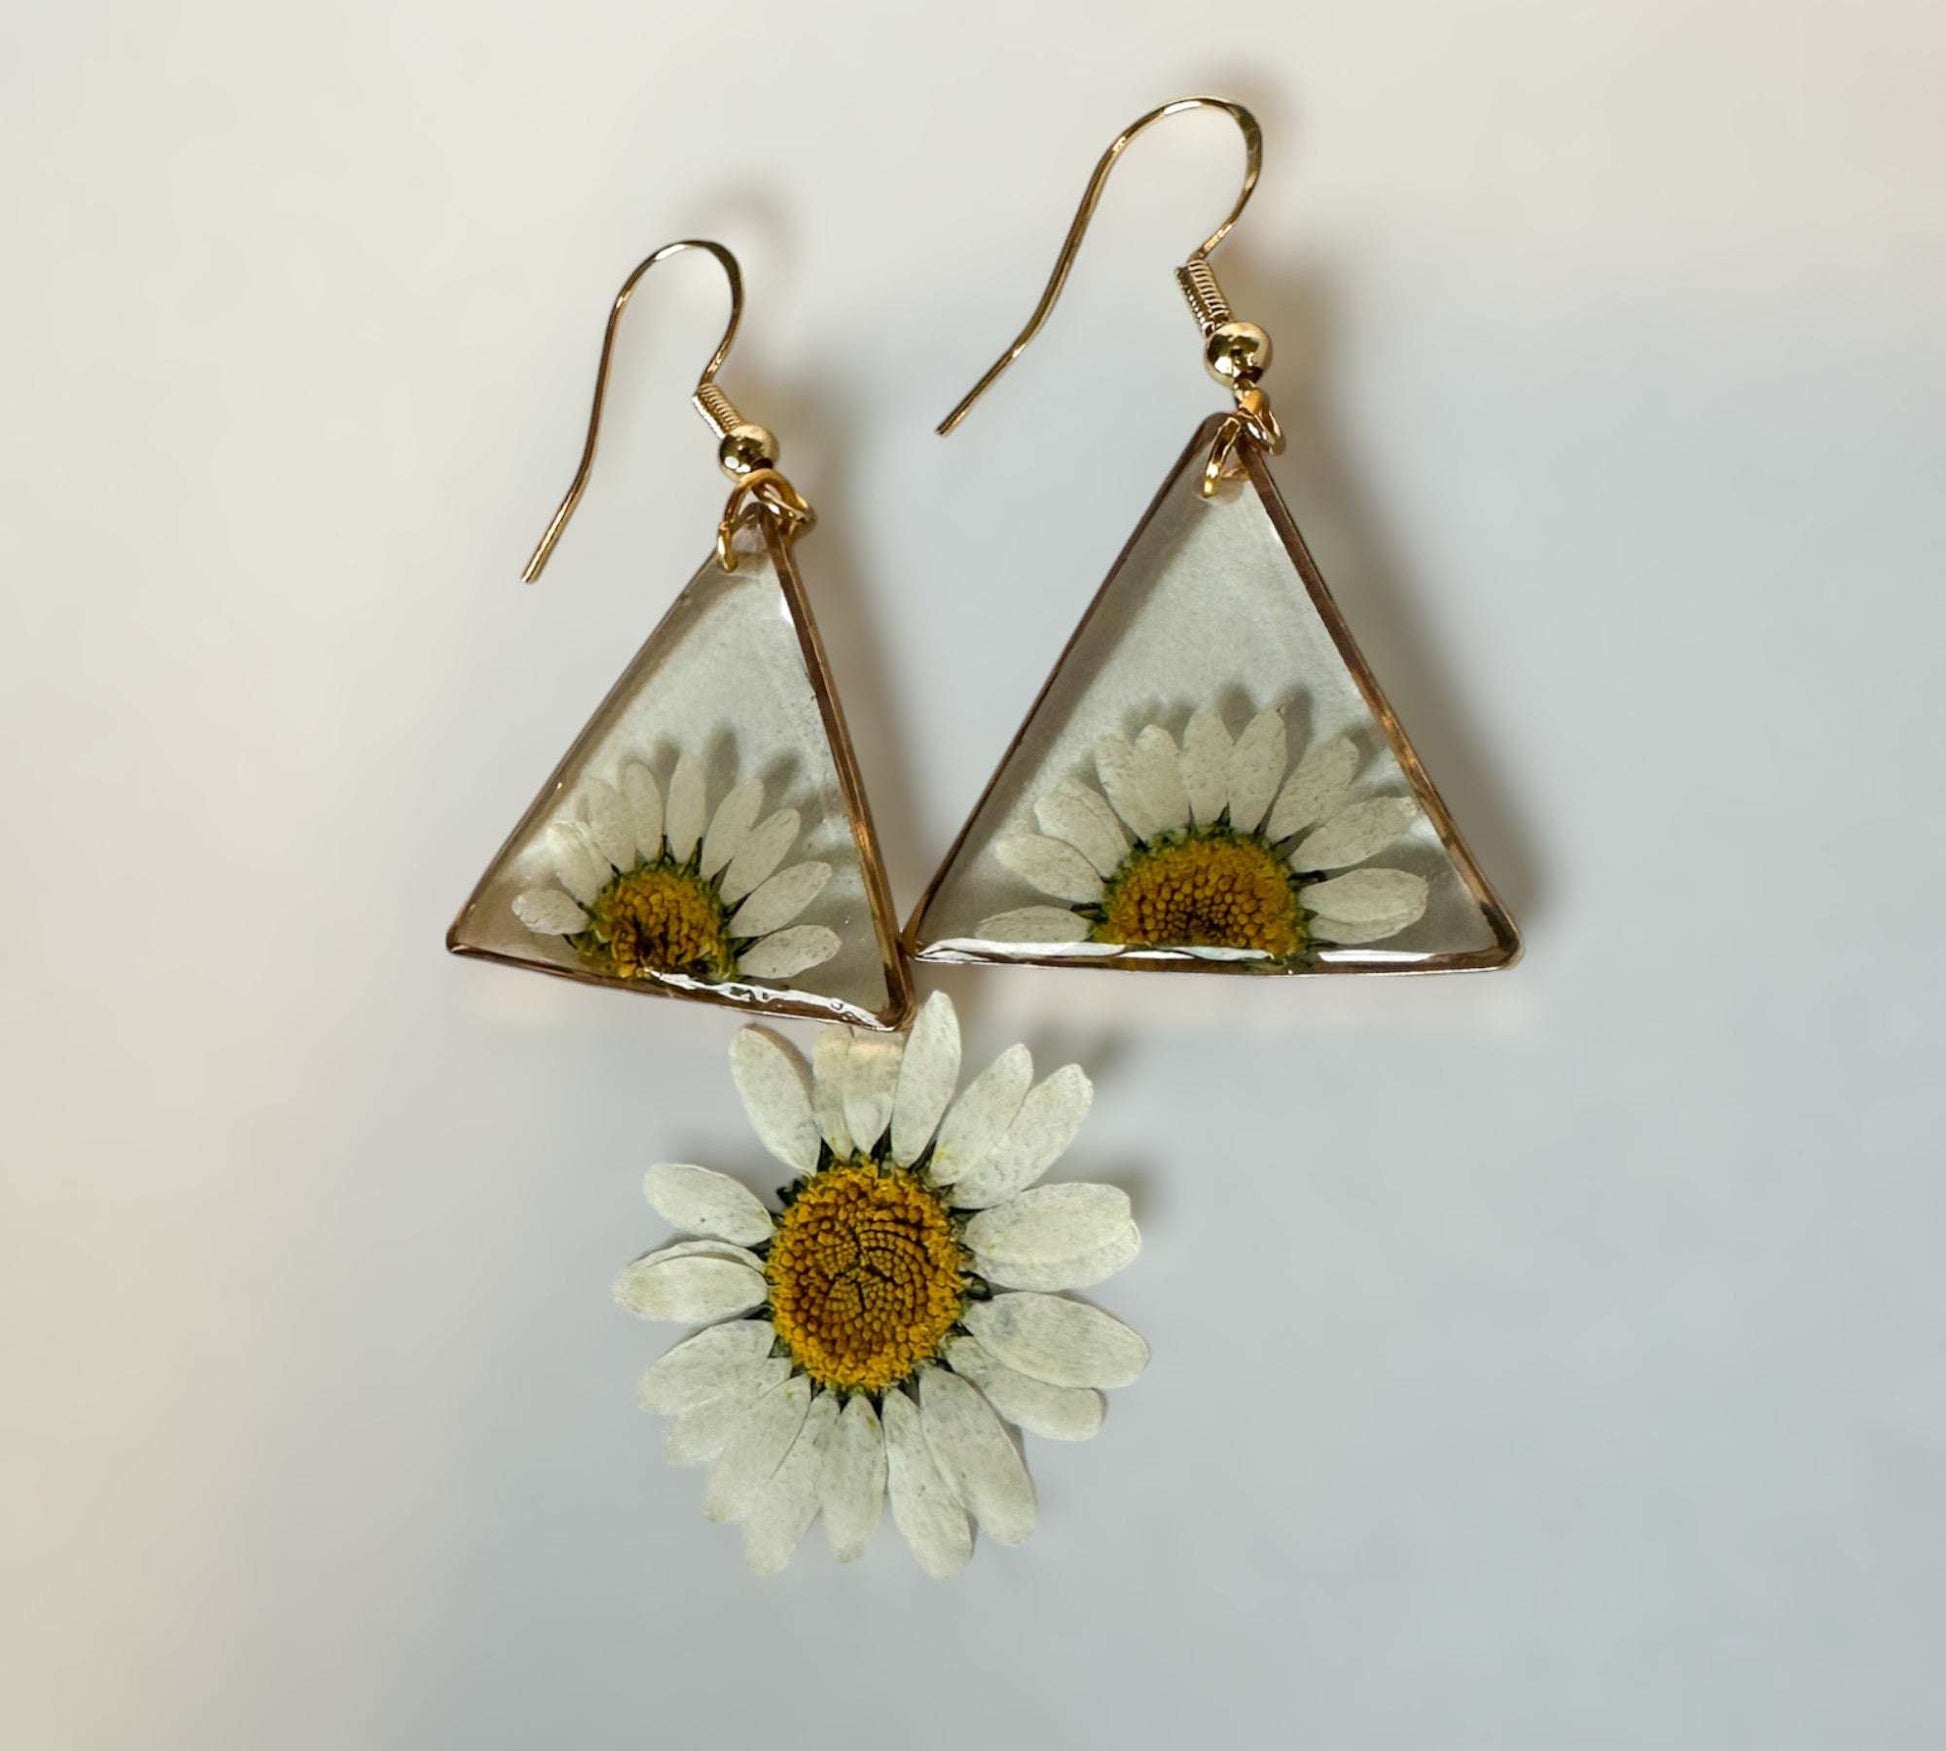 Daisy Dreams: Pressed Daisy Floral Earrings for Endless Charm